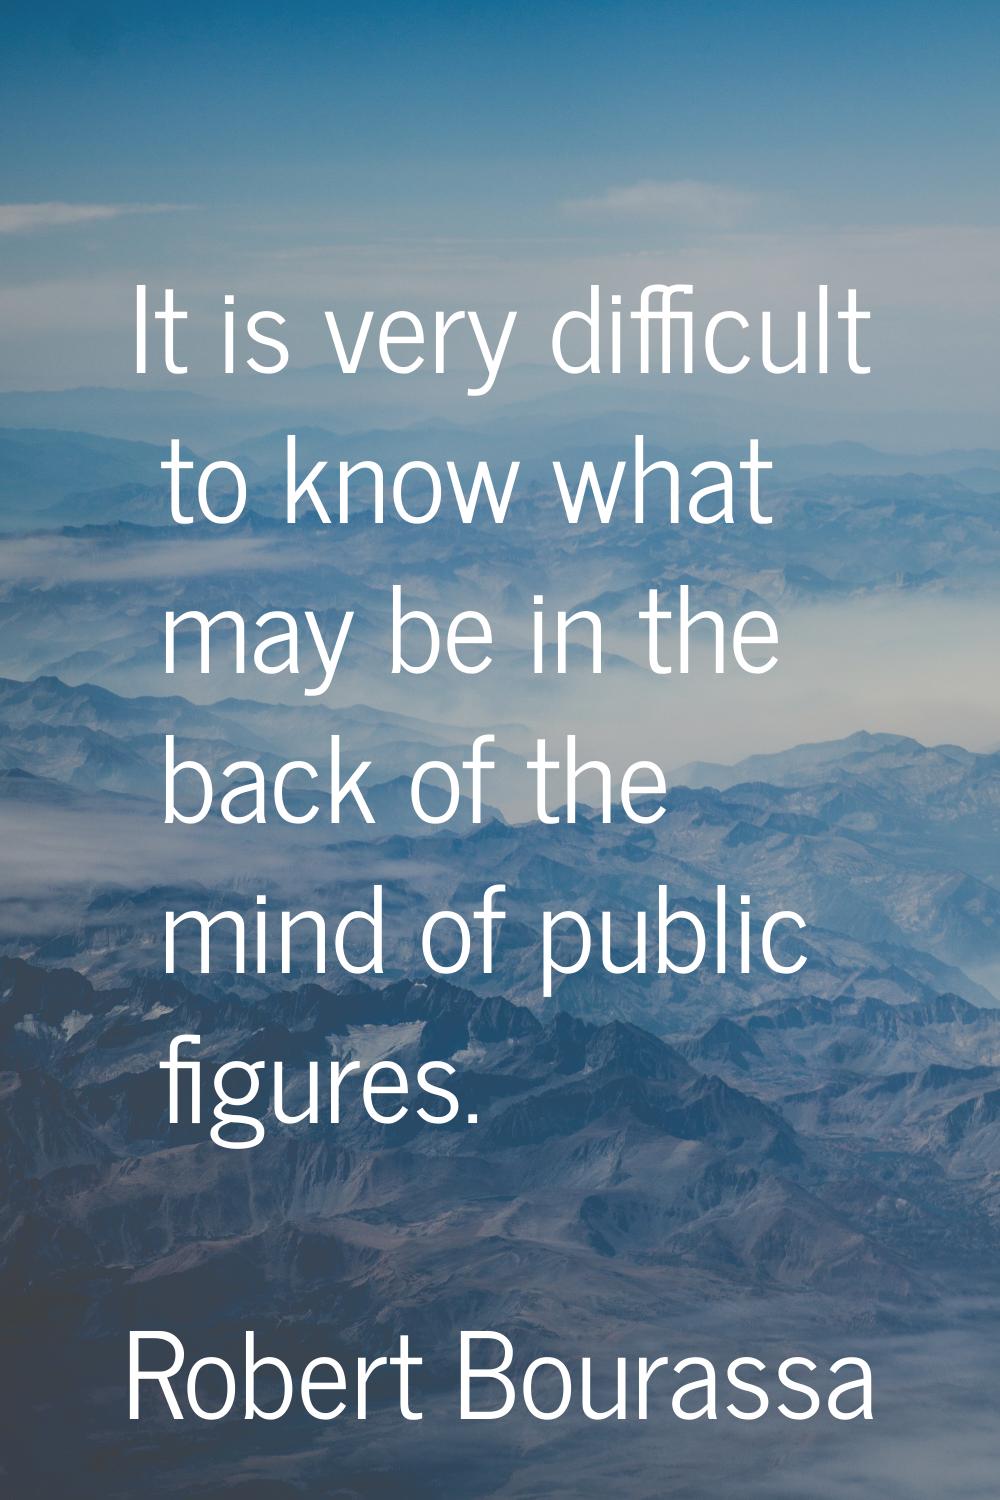 It is very difficult to know what may be in the back of the mind of public figures.